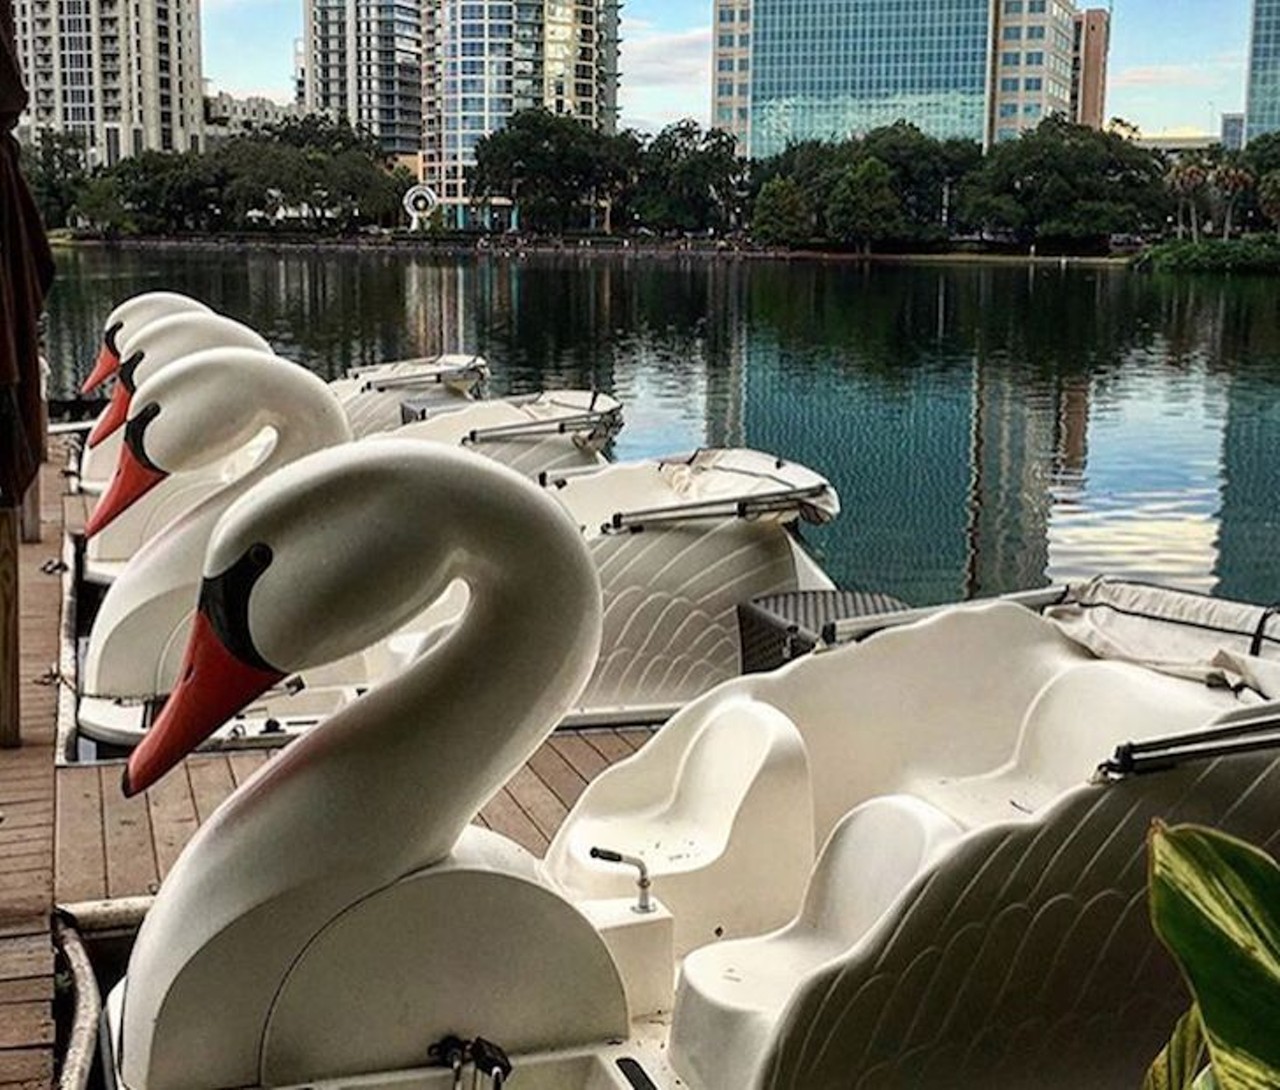 This is the only time of year you can paddle a Swan boat and not sweat
For some, only a masochist would board a swan boat in open, sunny Lake Eola, but what better way to explore Orlando&#146;s iconic lake &#151; and in ideal weather &#151; than on a giant bird? Rent a boat in the evening for the best views of Downtown nightlife.
Photo via dixie.rocks/Instagram